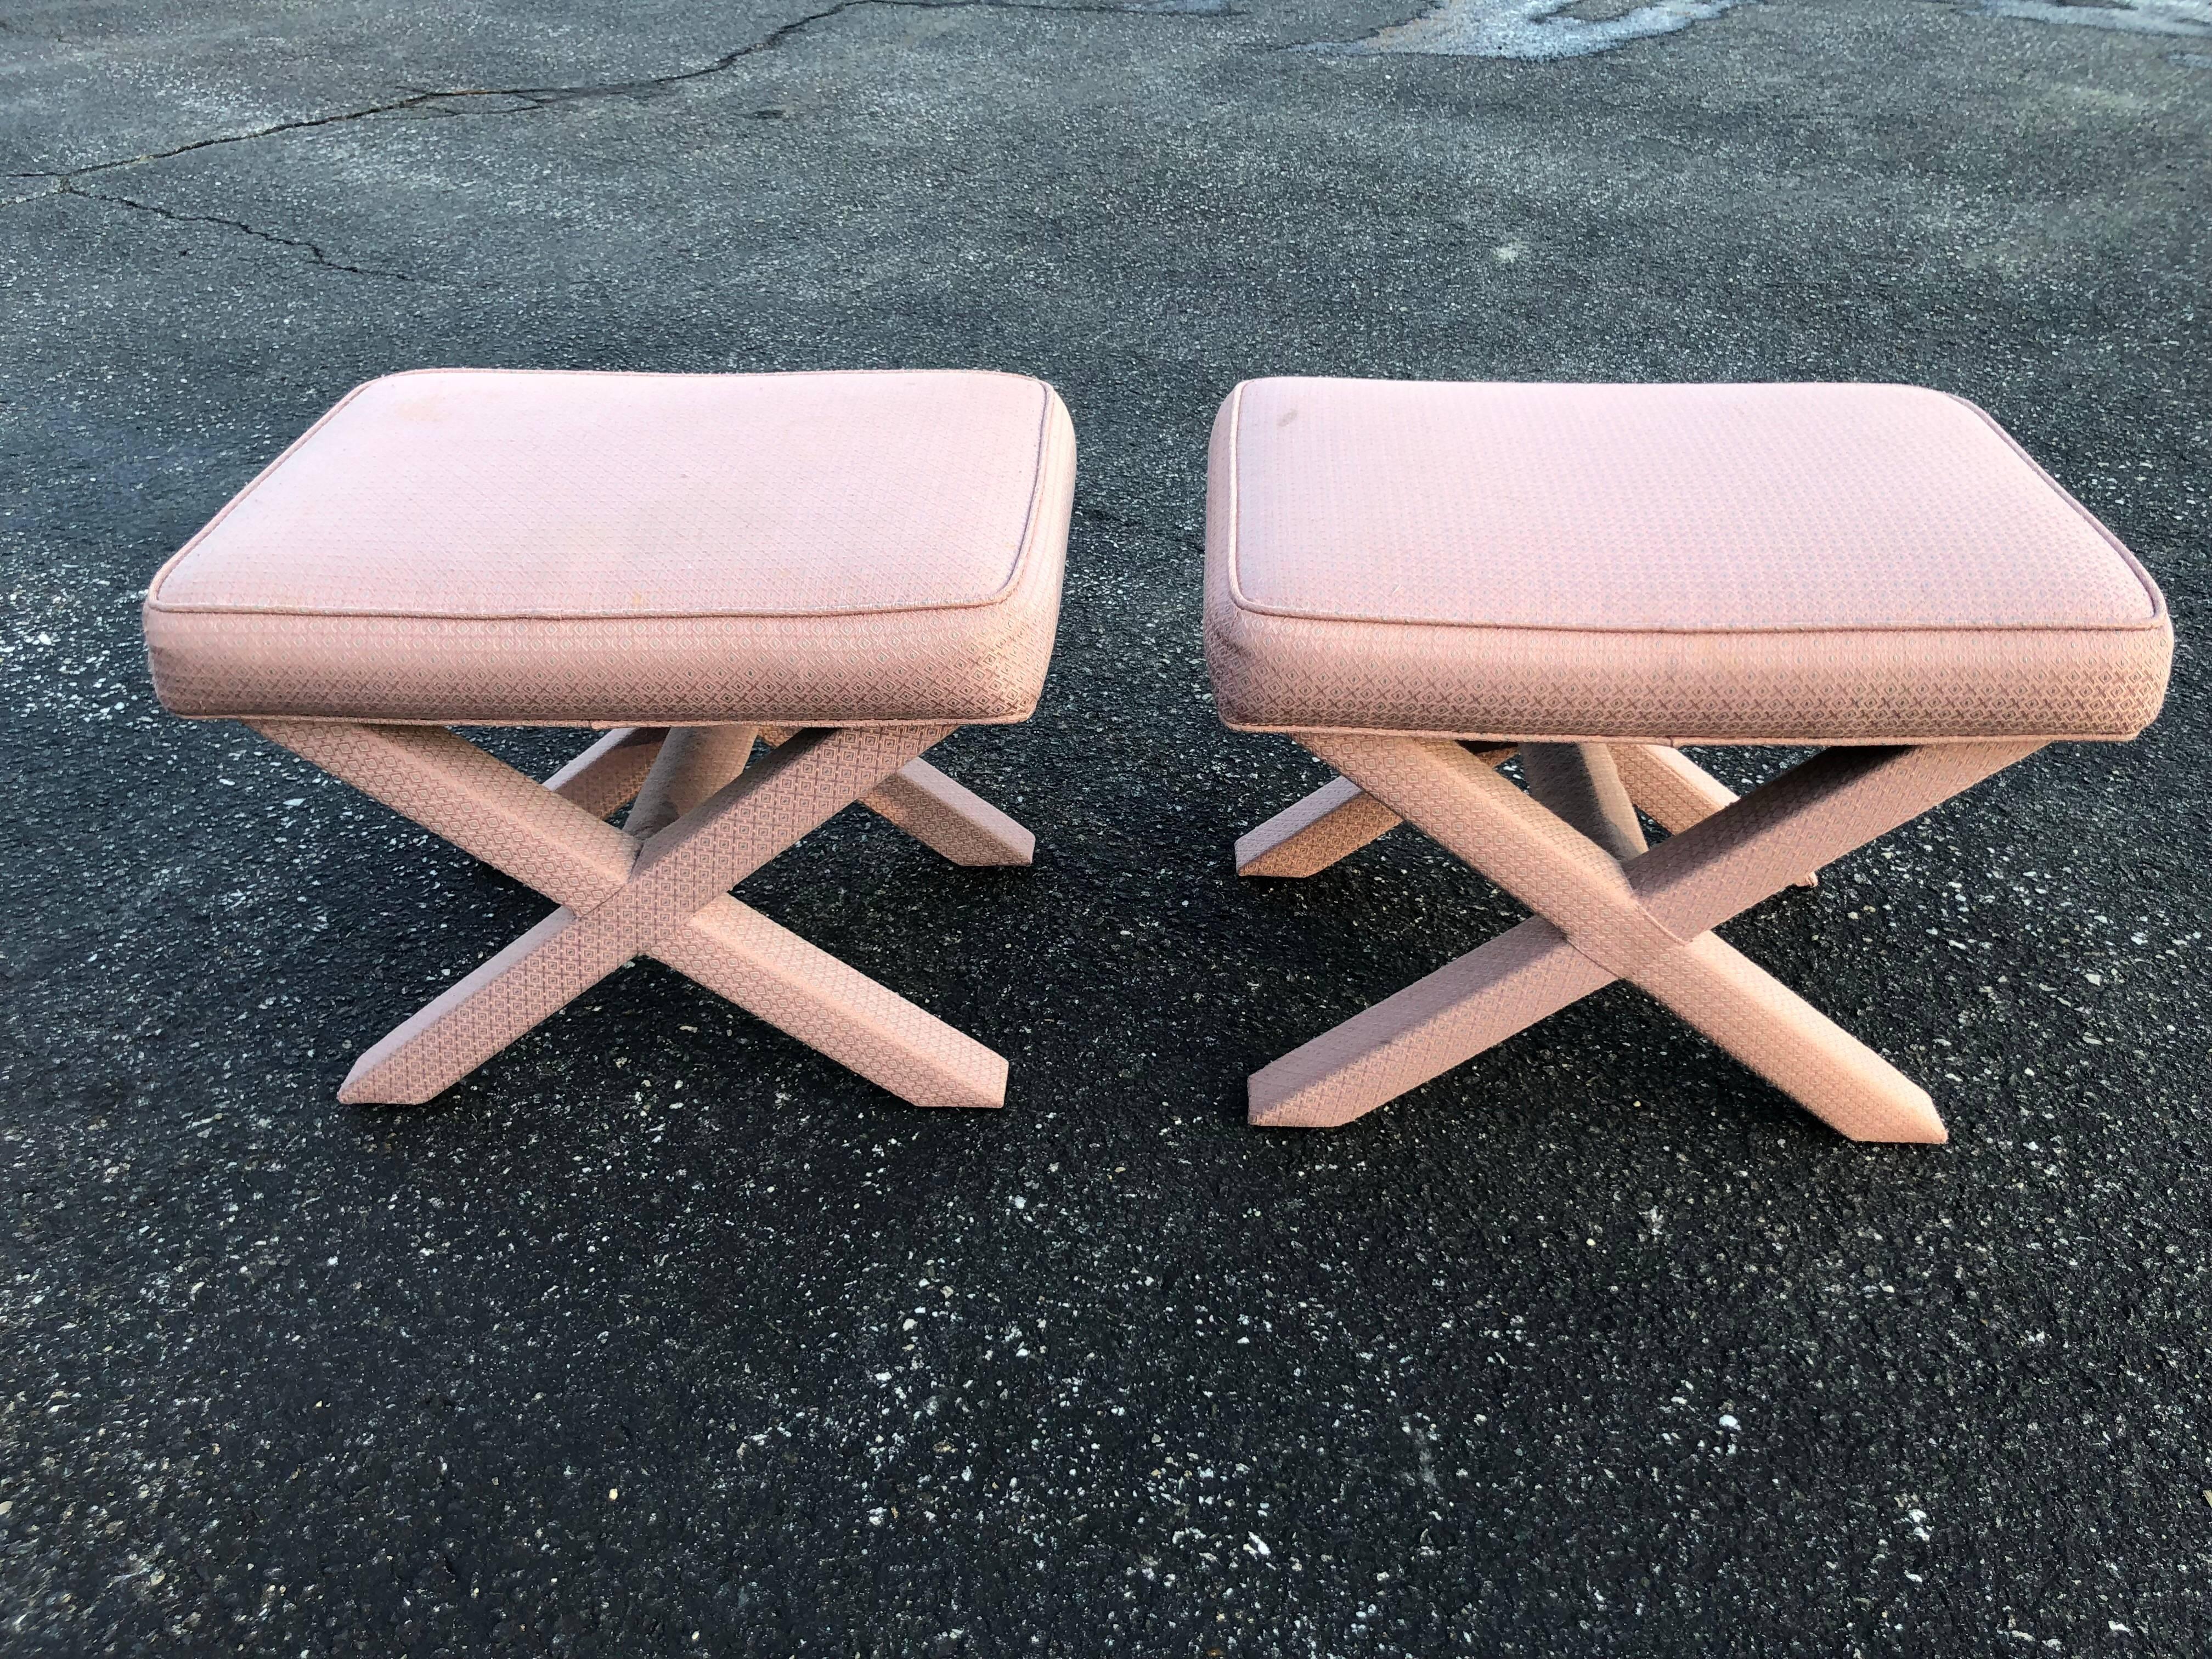 Pair of X-base stools or ottomans in the style of Billy Baldwin. Pale pinkish mauve upholstery. Could use a recover. Some marks on stools. See photos. Hollywood Regency design but of the midcentury period.
   